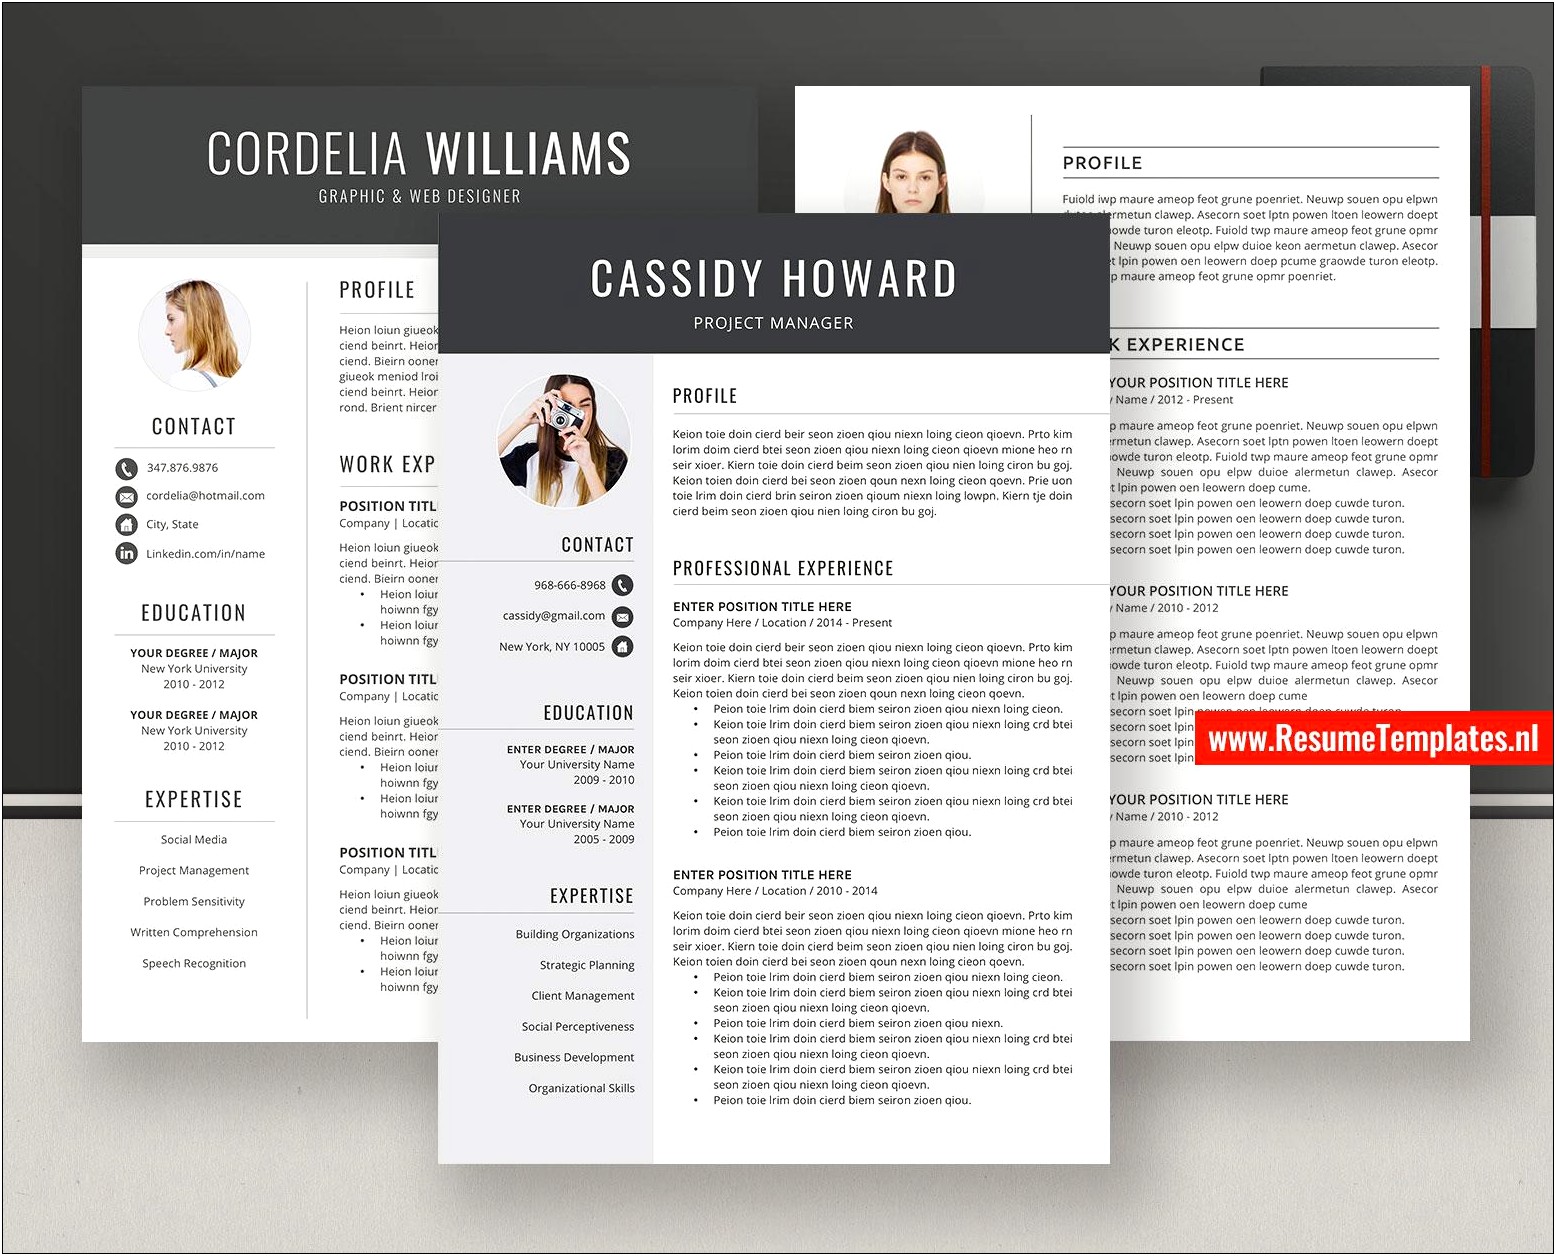 Creative Resumes For Corporate Job